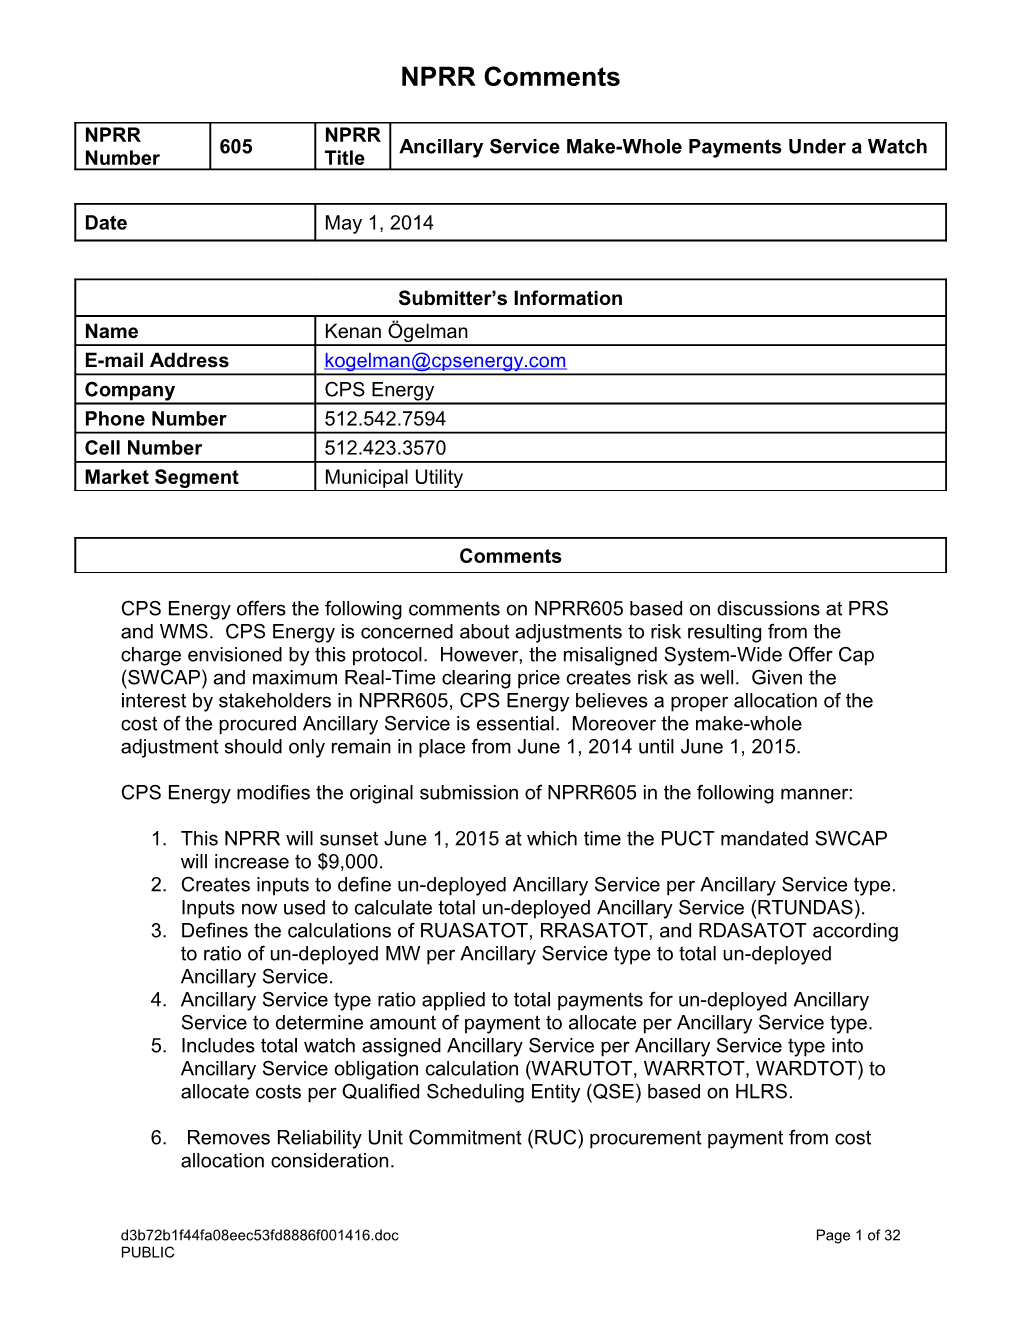 CPS Energy Modifies the Original Submission of NPRR605 in the Following Manner